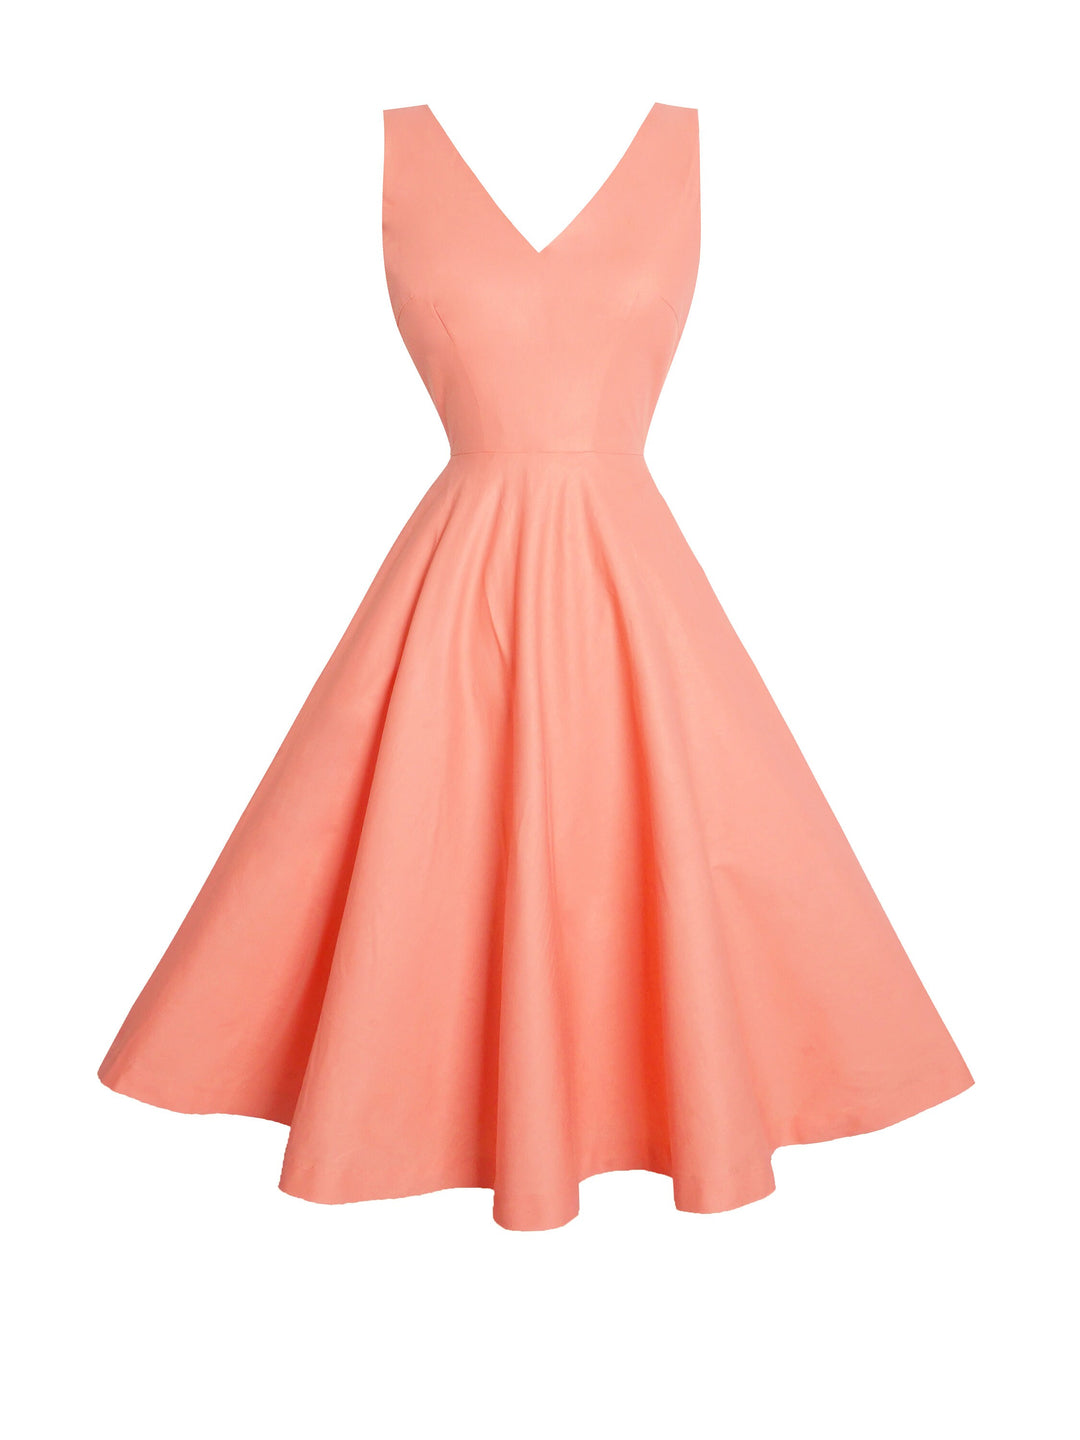 RTS - Size S - Diana Dress in Coral Pink Cotton